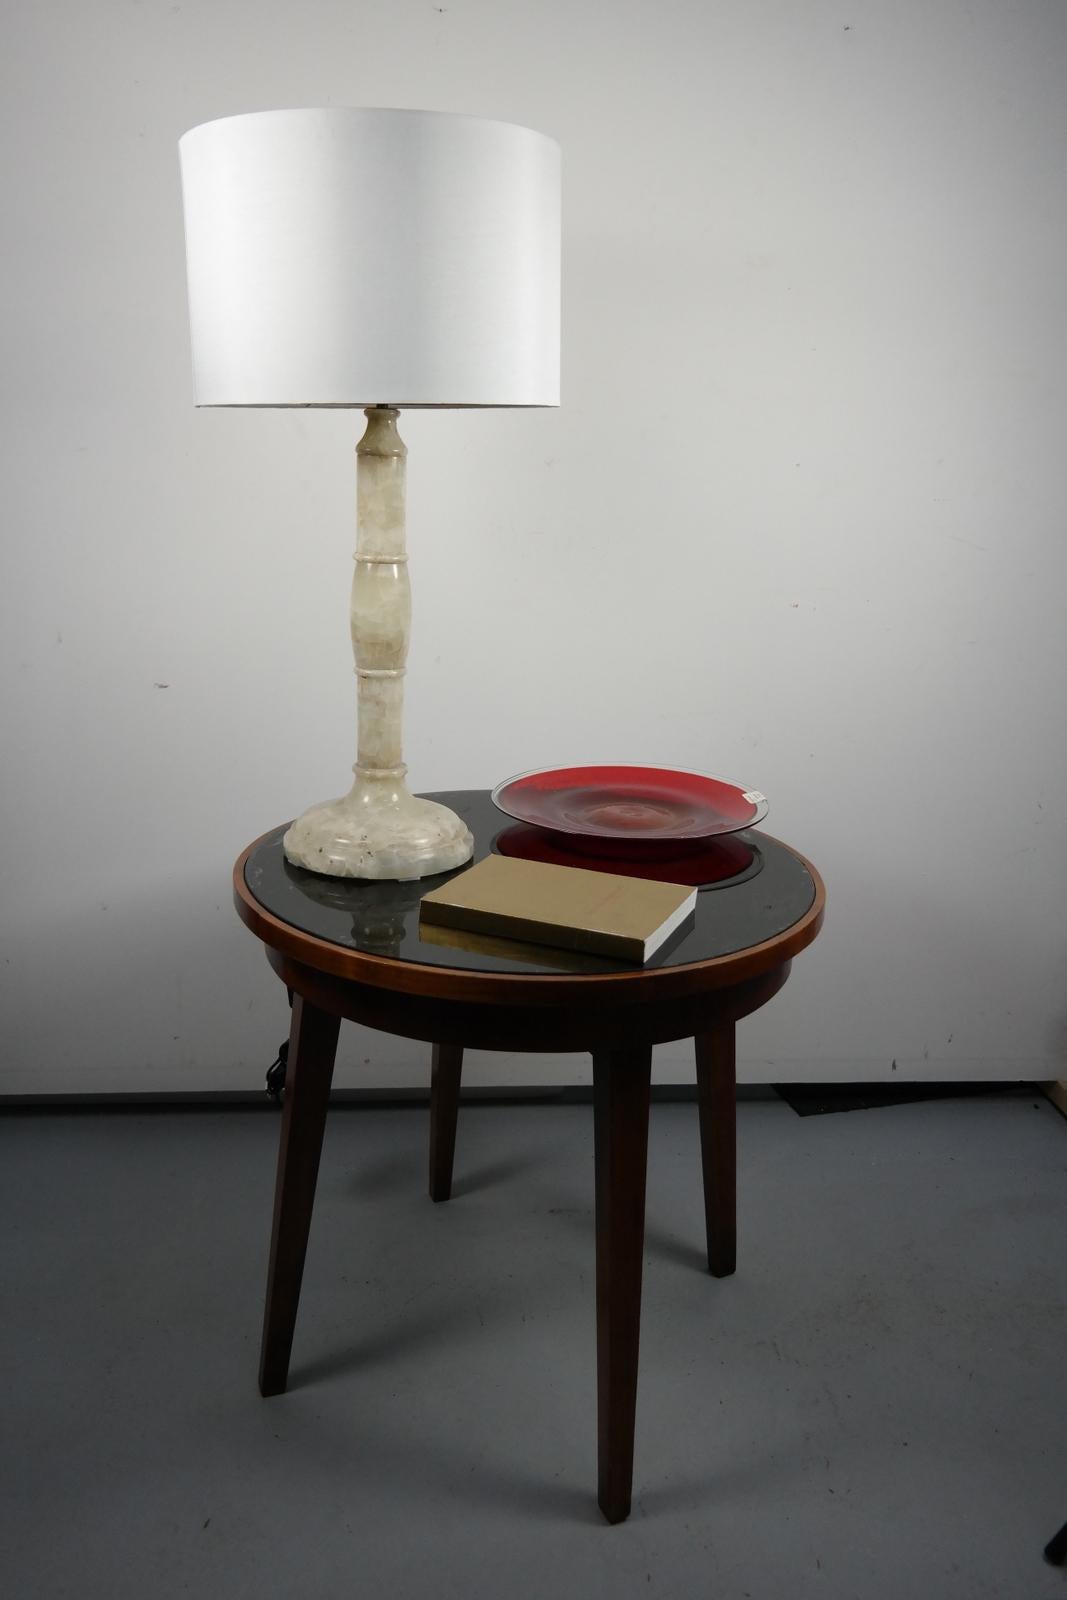 Agate stone table lamp with satin lampshade, 1970s.